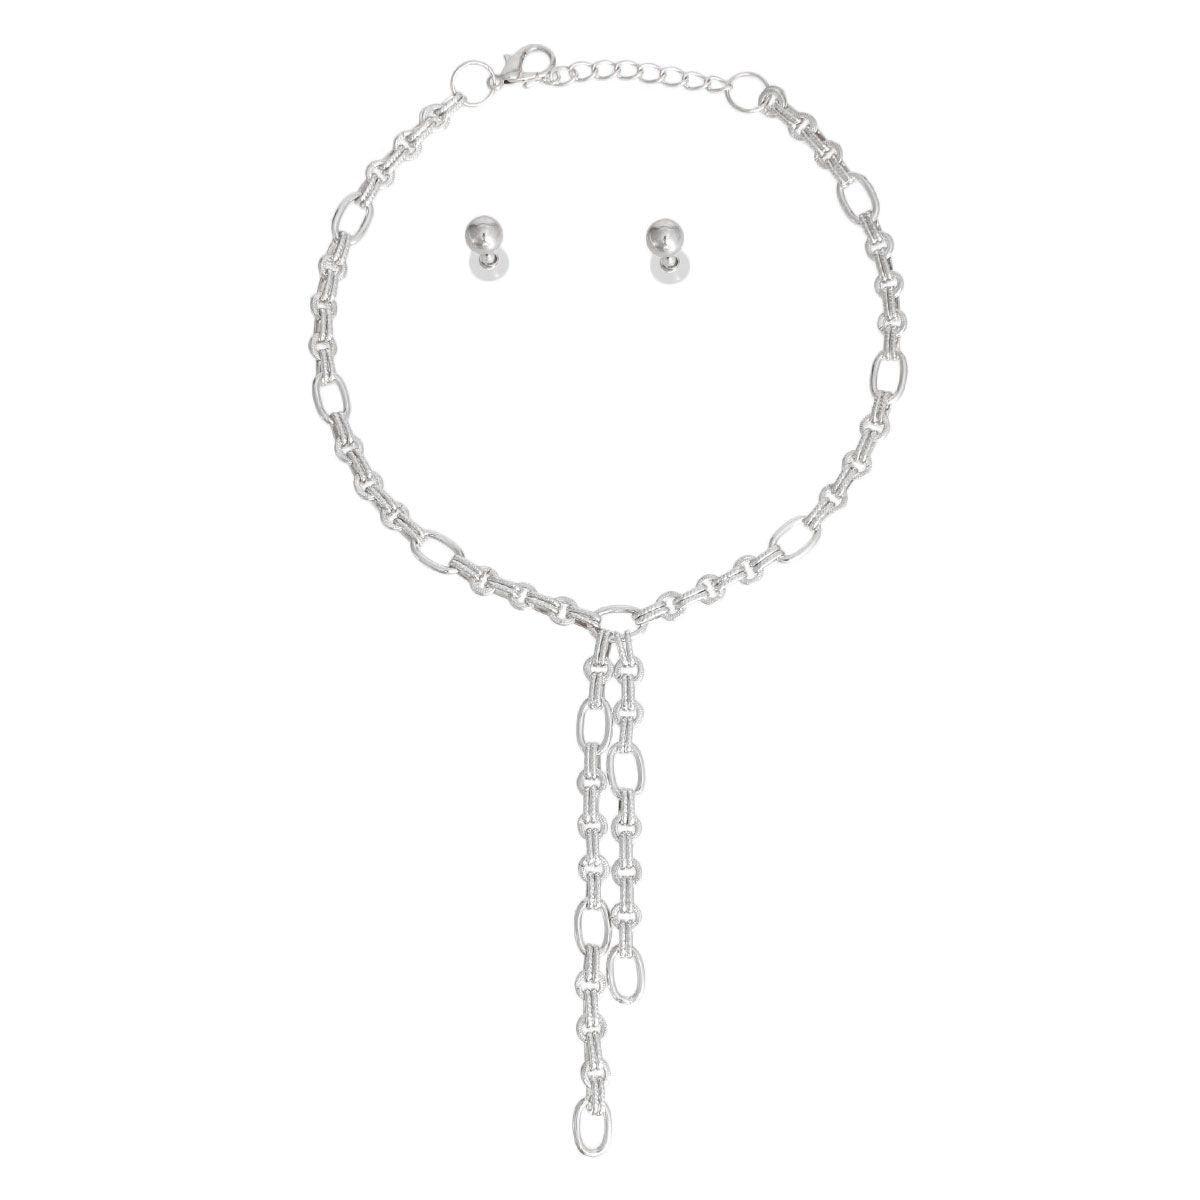 Shop Cool Style Silver Finish Lariat Necklace Set - Limited Stock!